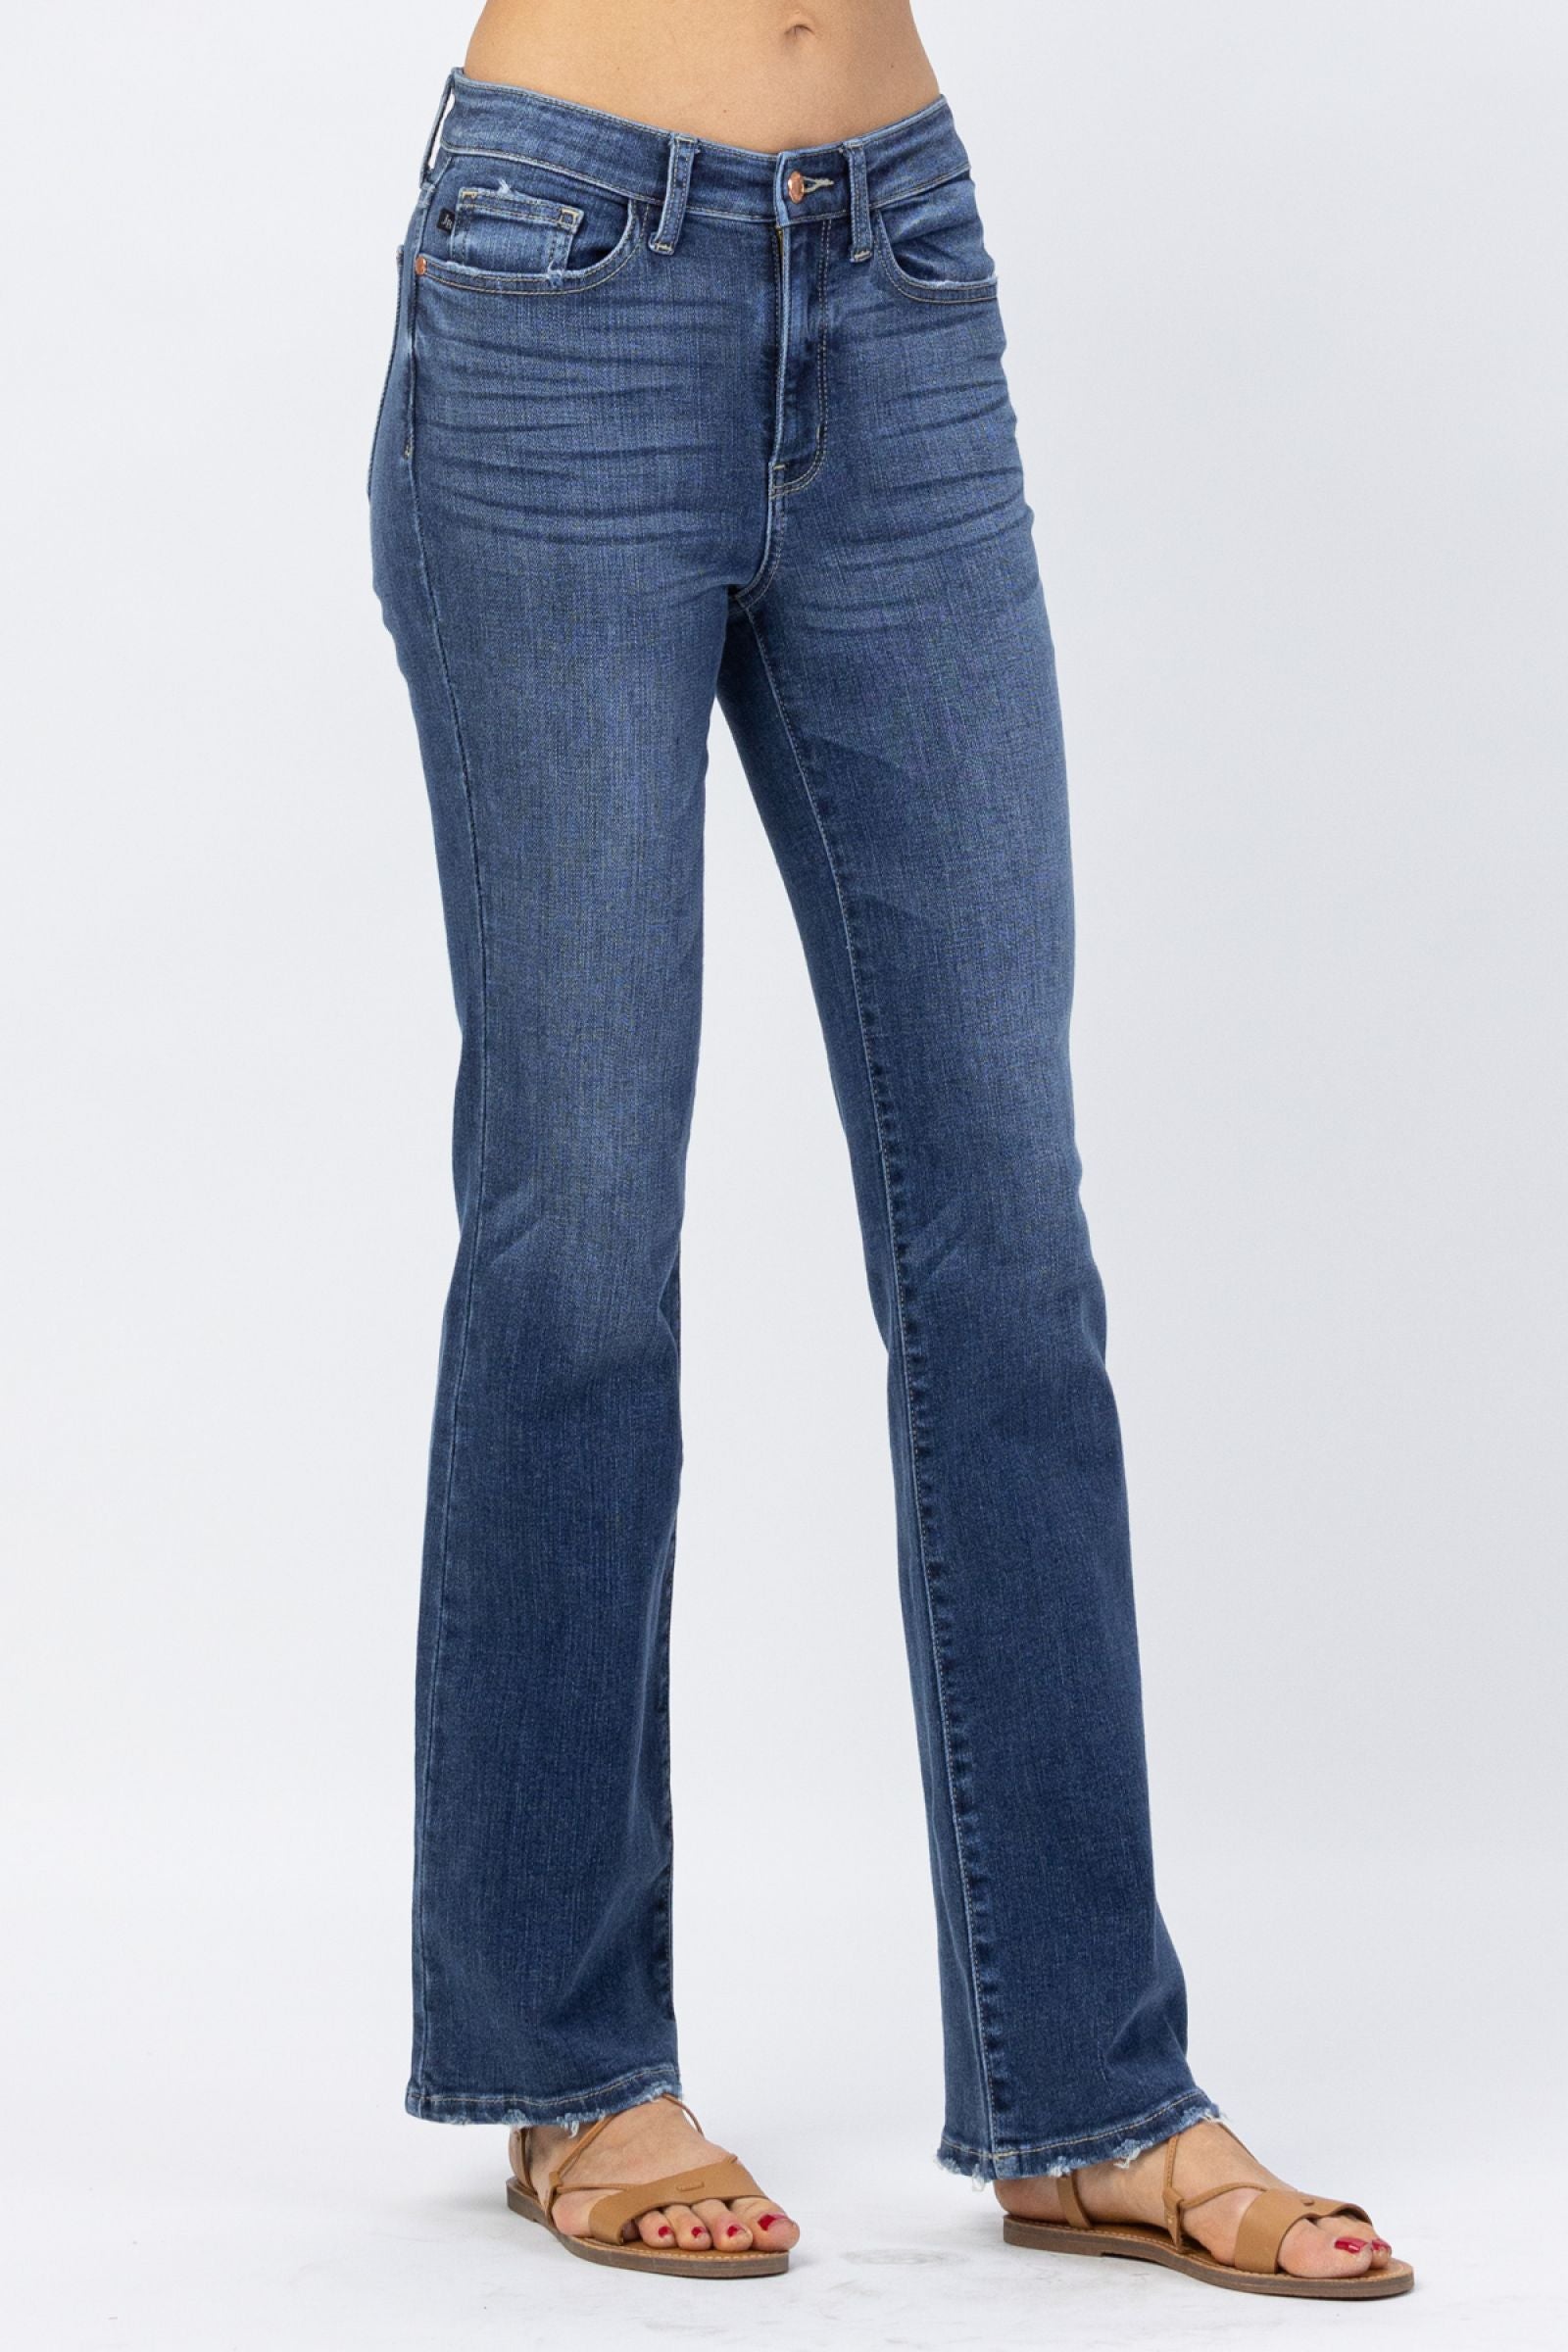 Size 1 & 20W Judy Blue Non Distressed Bootcut Denim Jeans